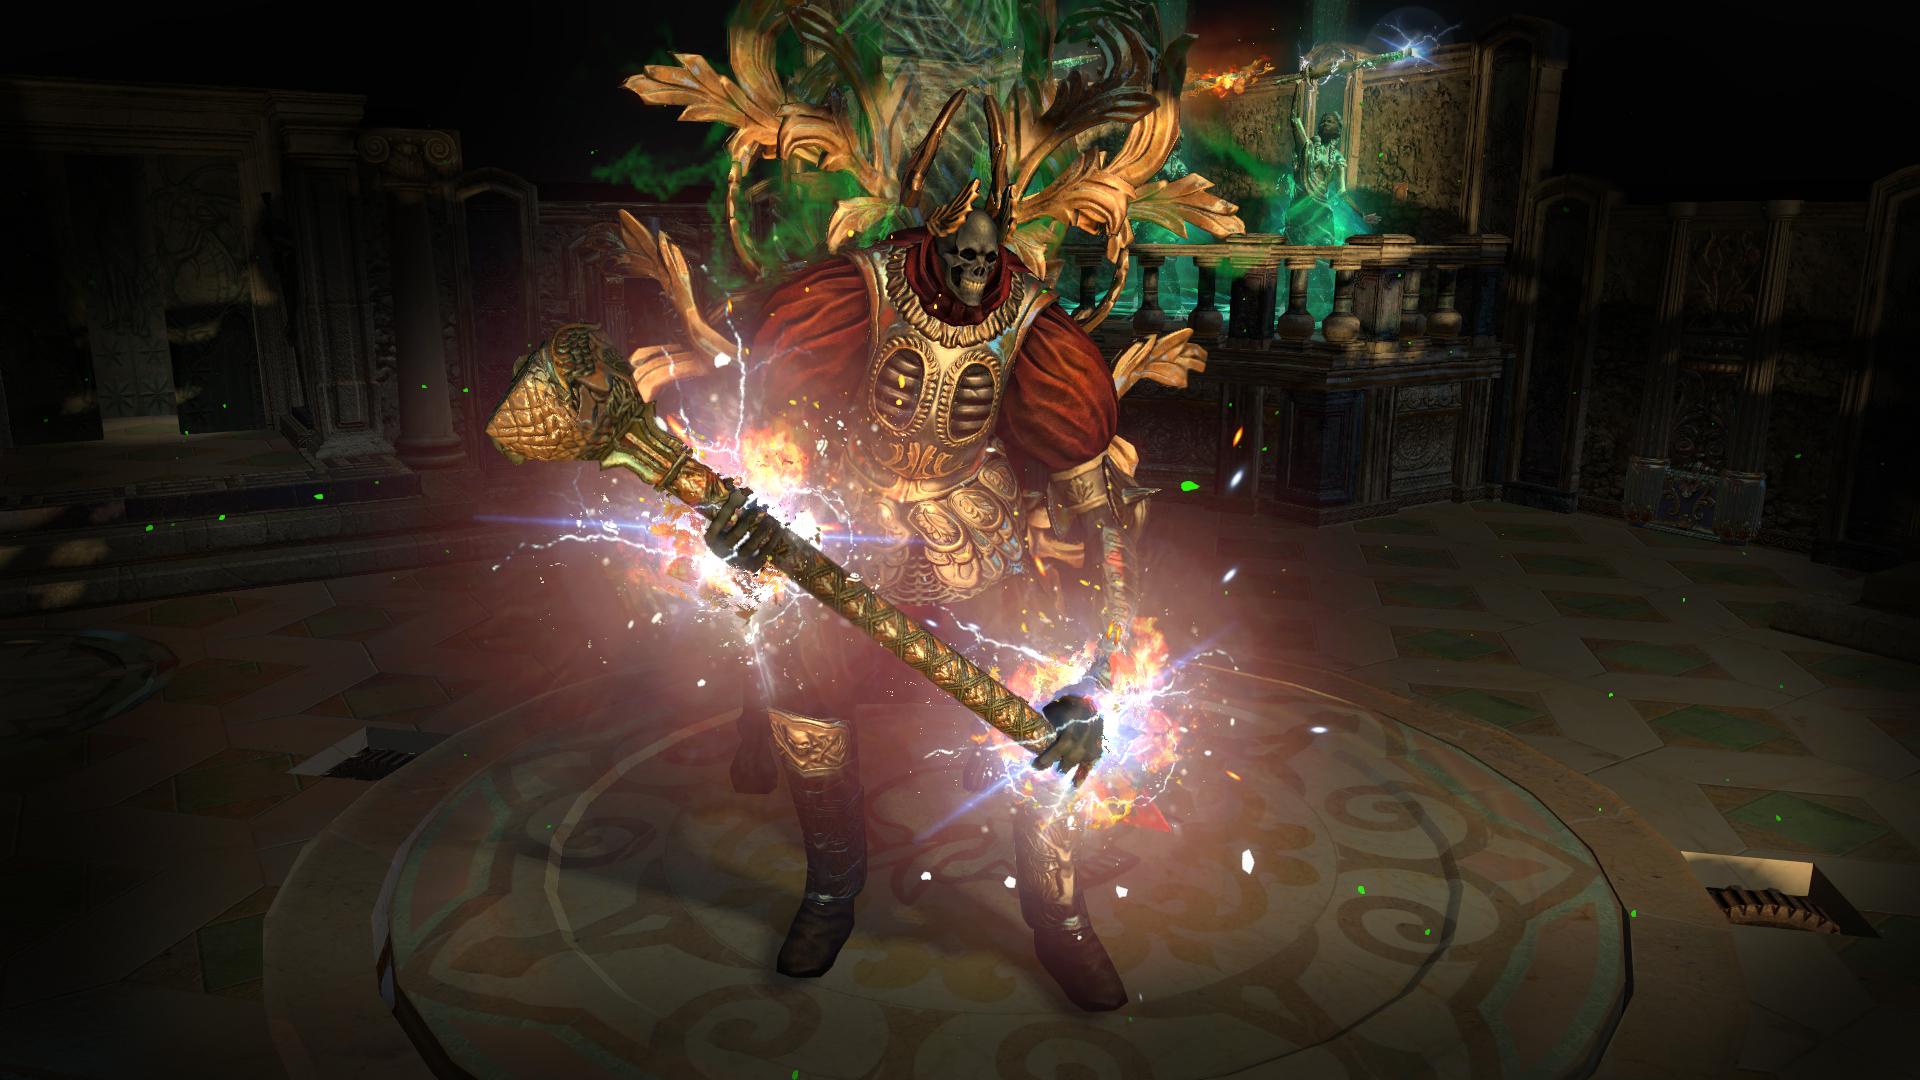 Screenshot №31 from game Path of Exile